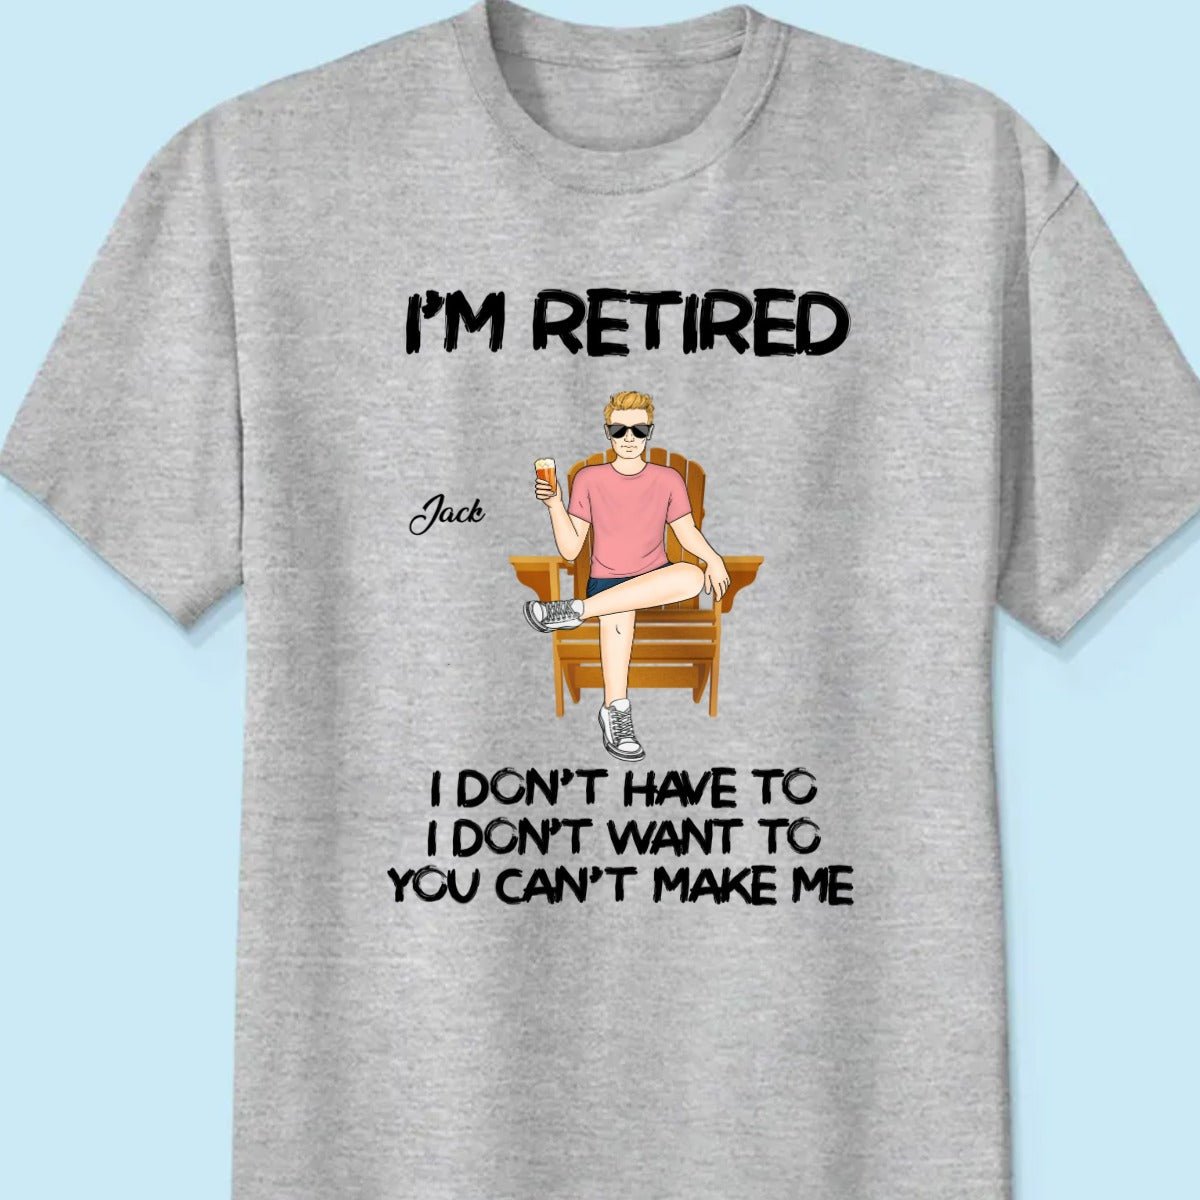 Retirement - Woman Man Sitting I‘m Retired You Can’t Make Me Retirement - Personalized Shirt - The Next Custom Gift